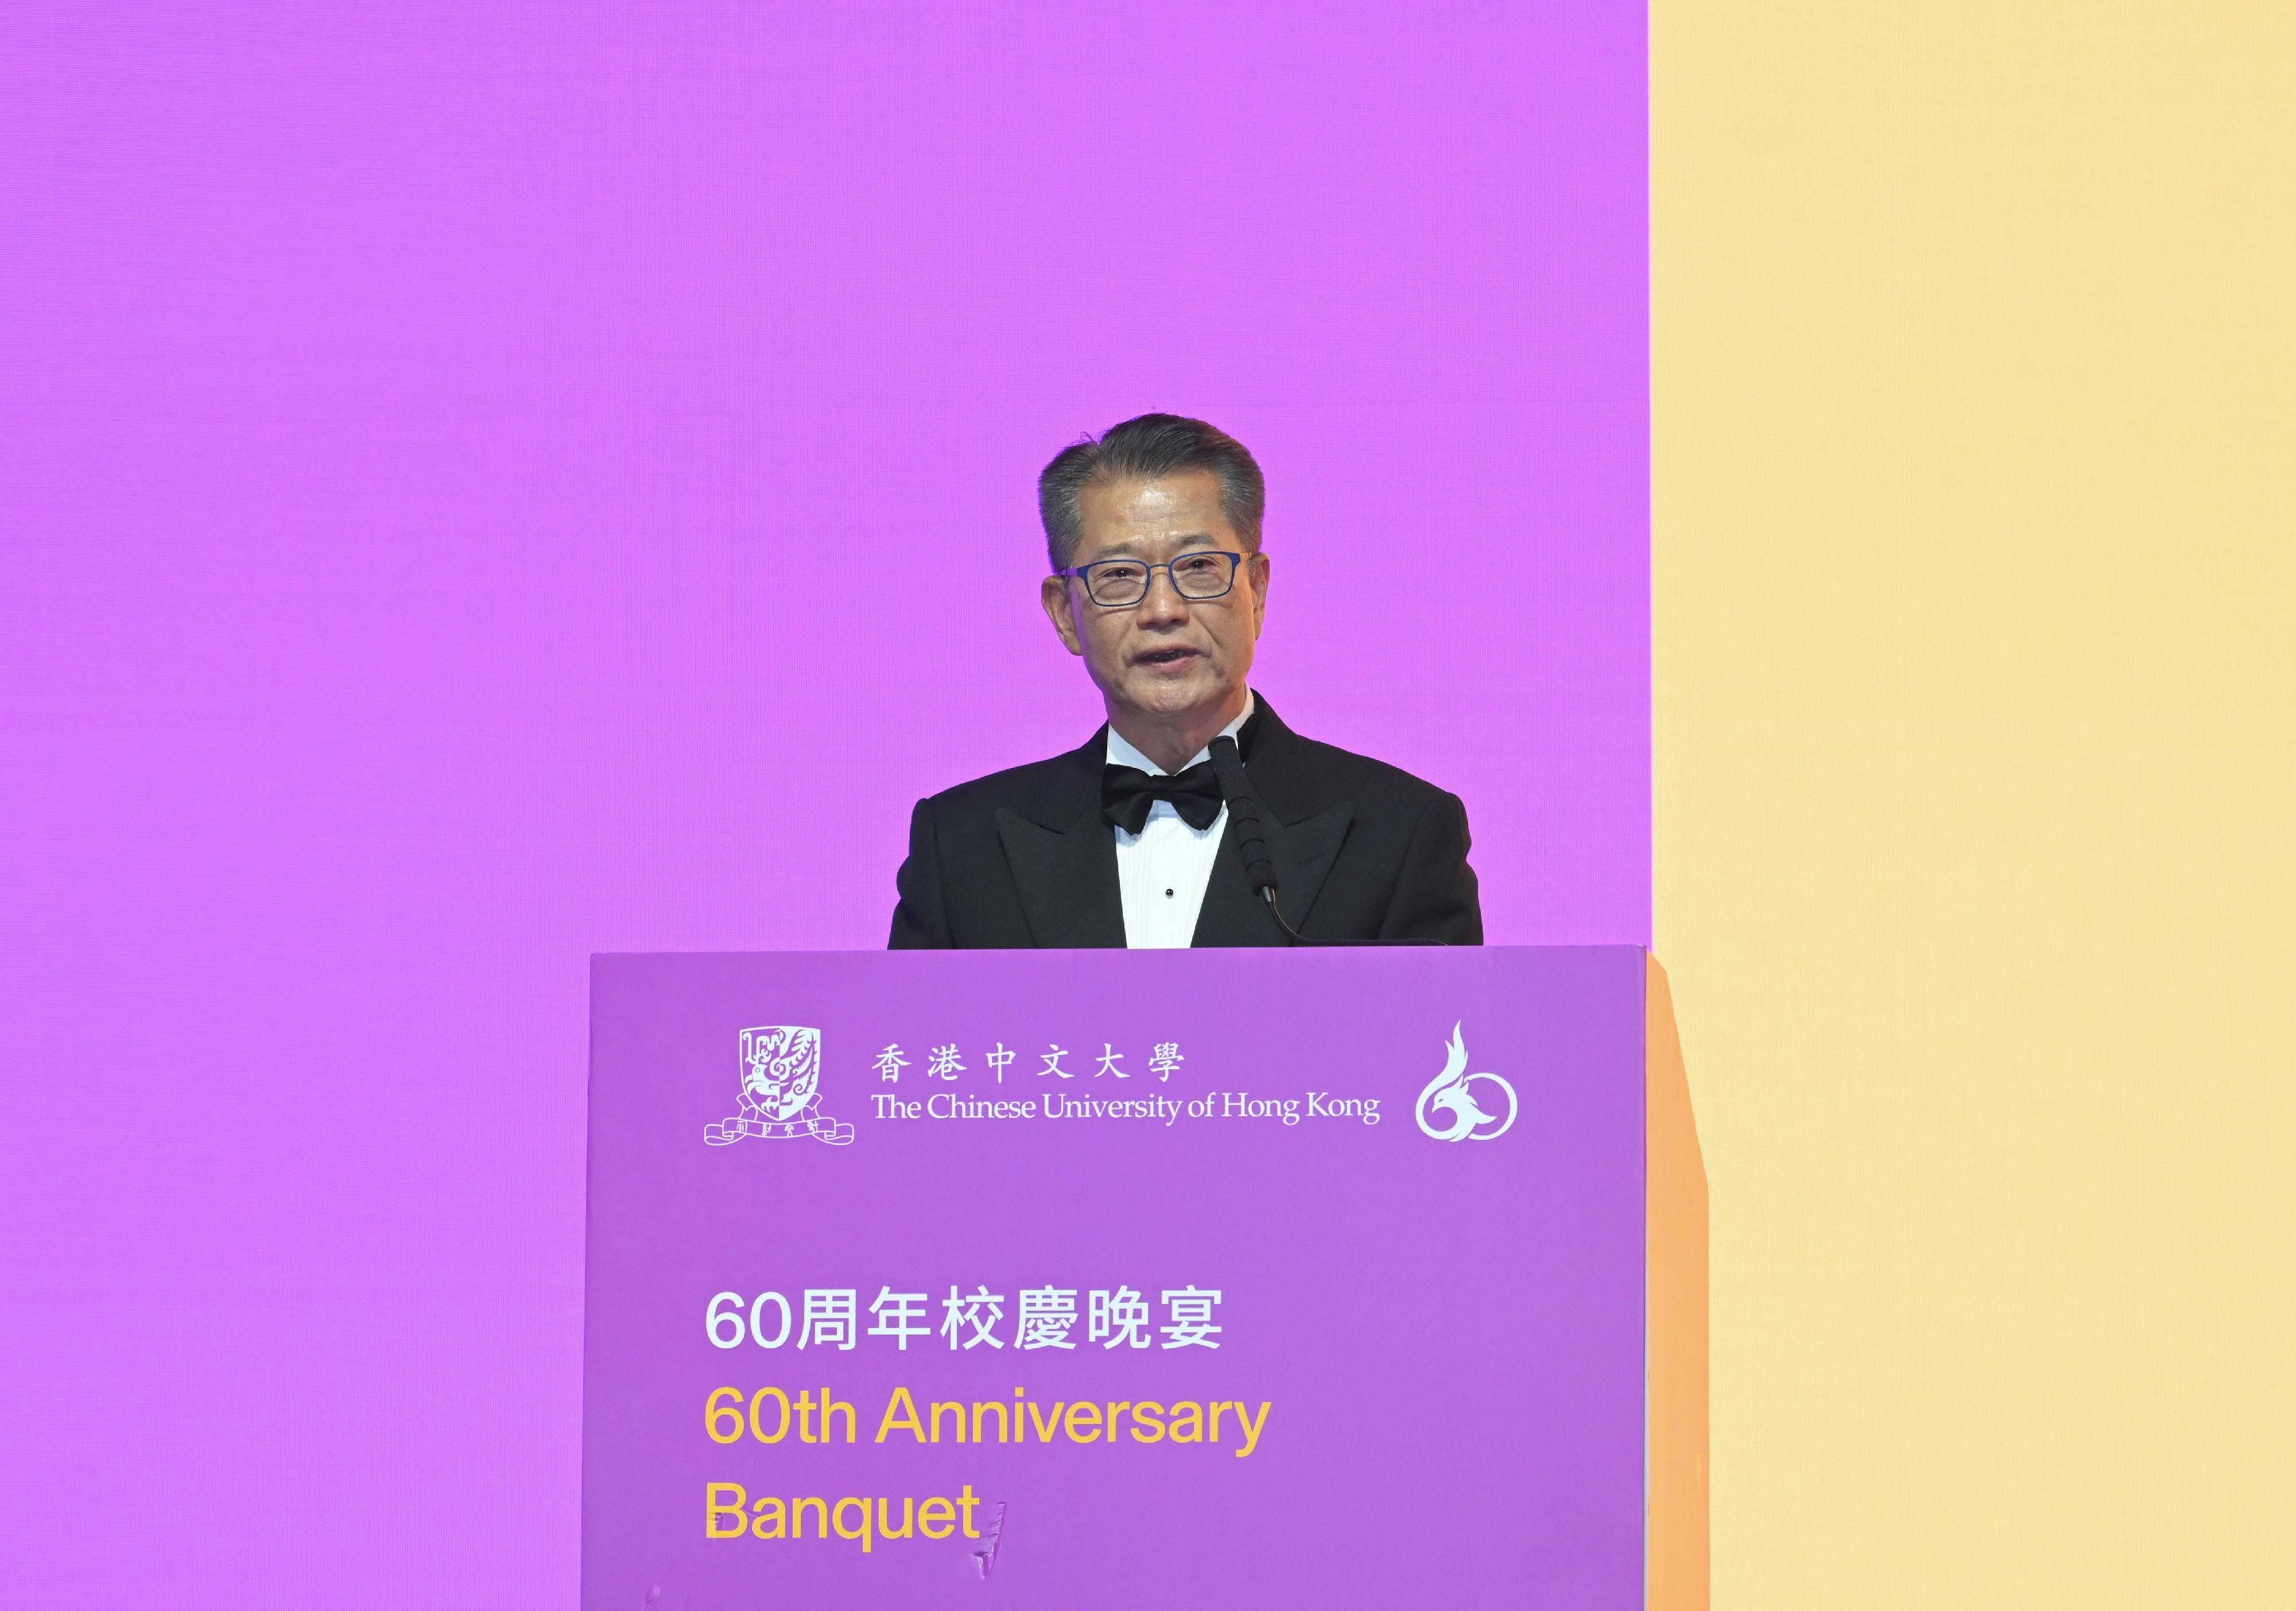 The Financial Secretary, Mr Paul Chan, speaks at the Chinese University of Hong Kong 60th Anniversary Banquet today (December 10).